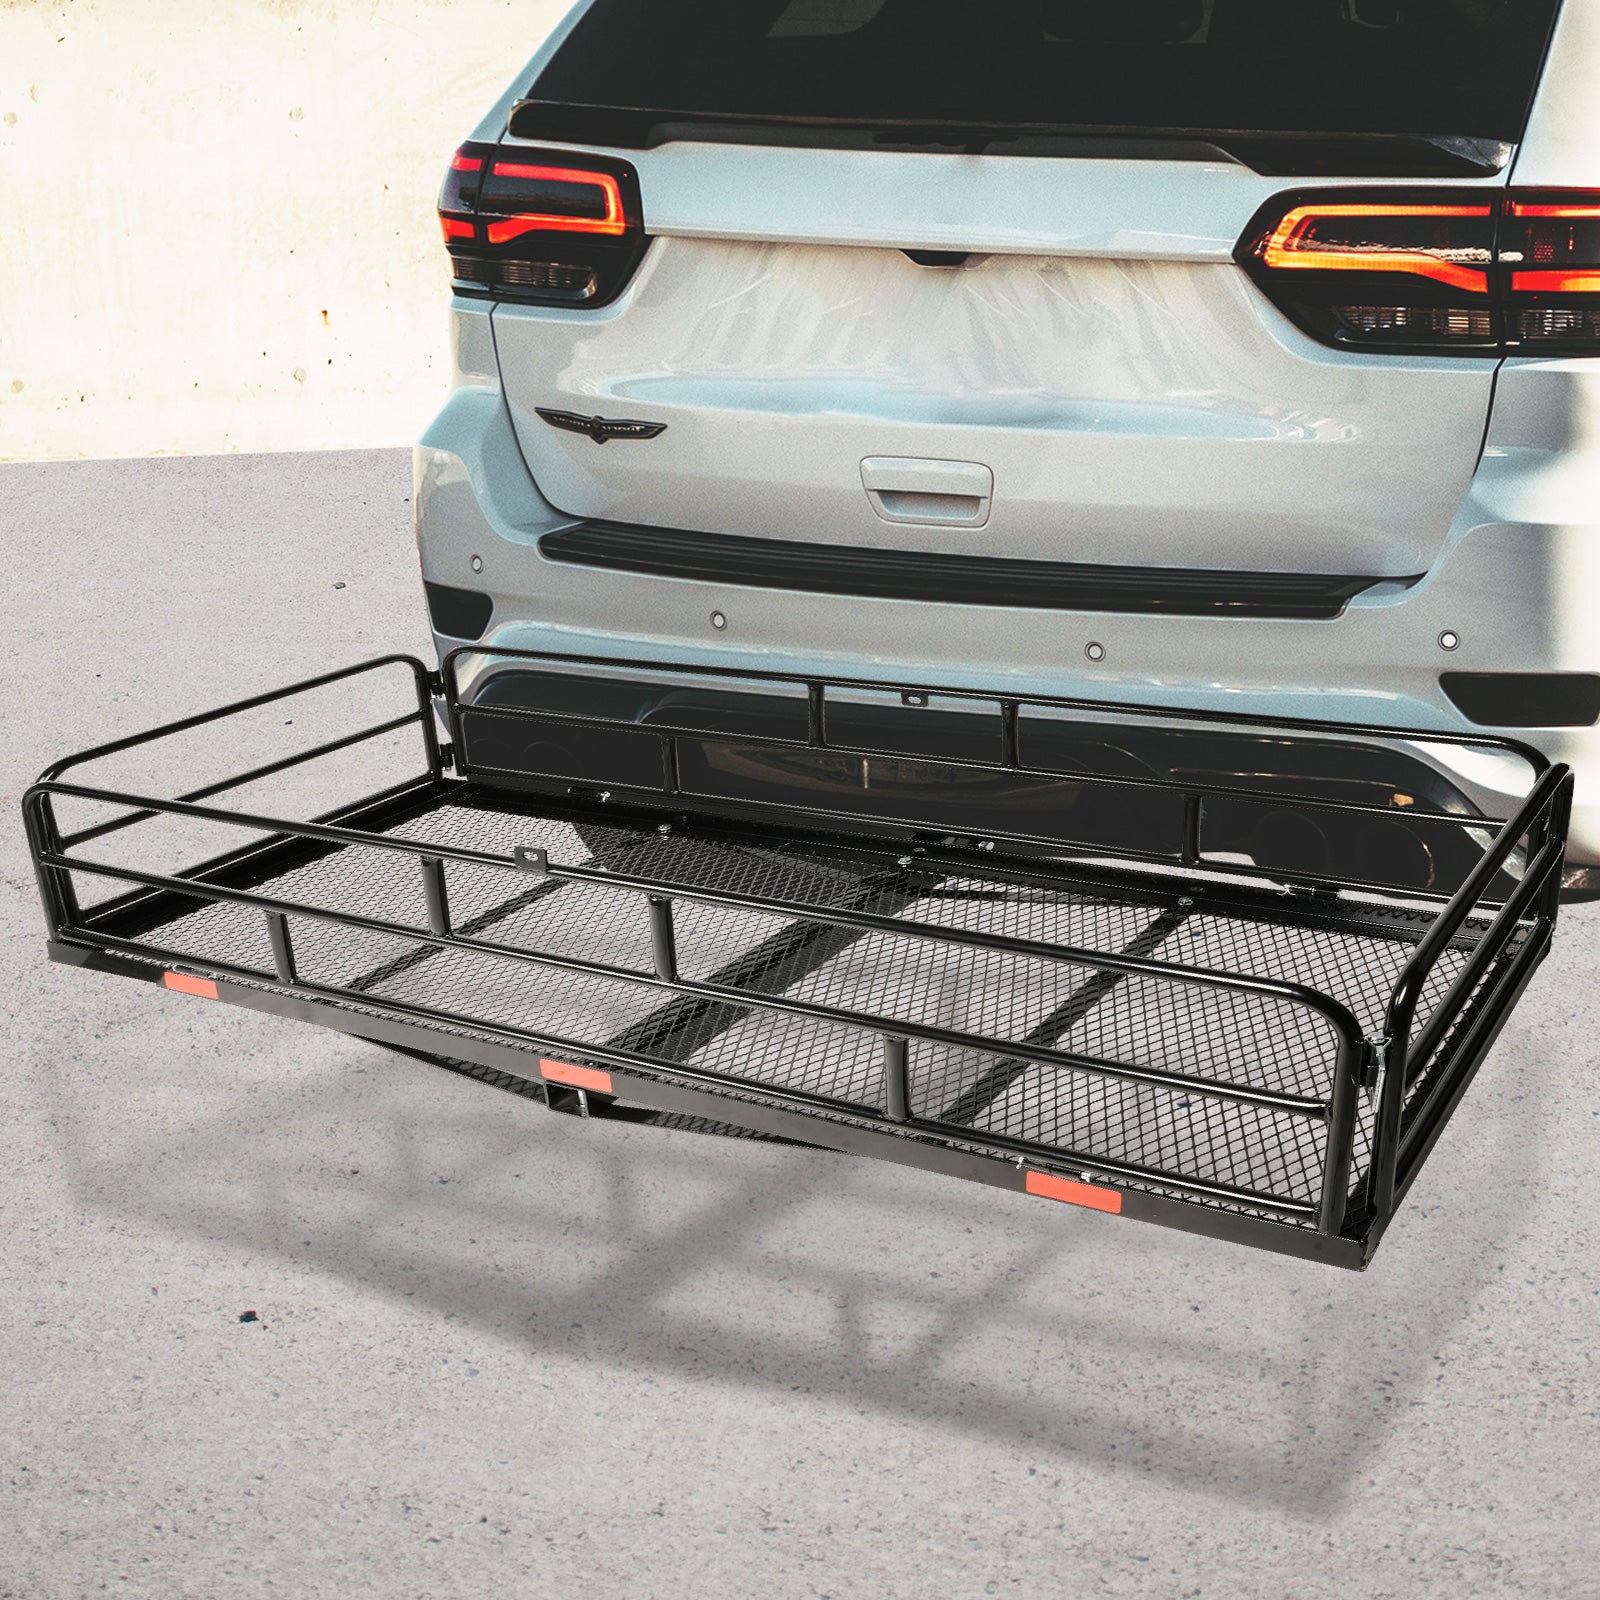 LUCKYERMORE 60"x 24" Hitch Mount Steel Cargo Carrier Basket Folding Cargo Rack with 2" Receiver, Black